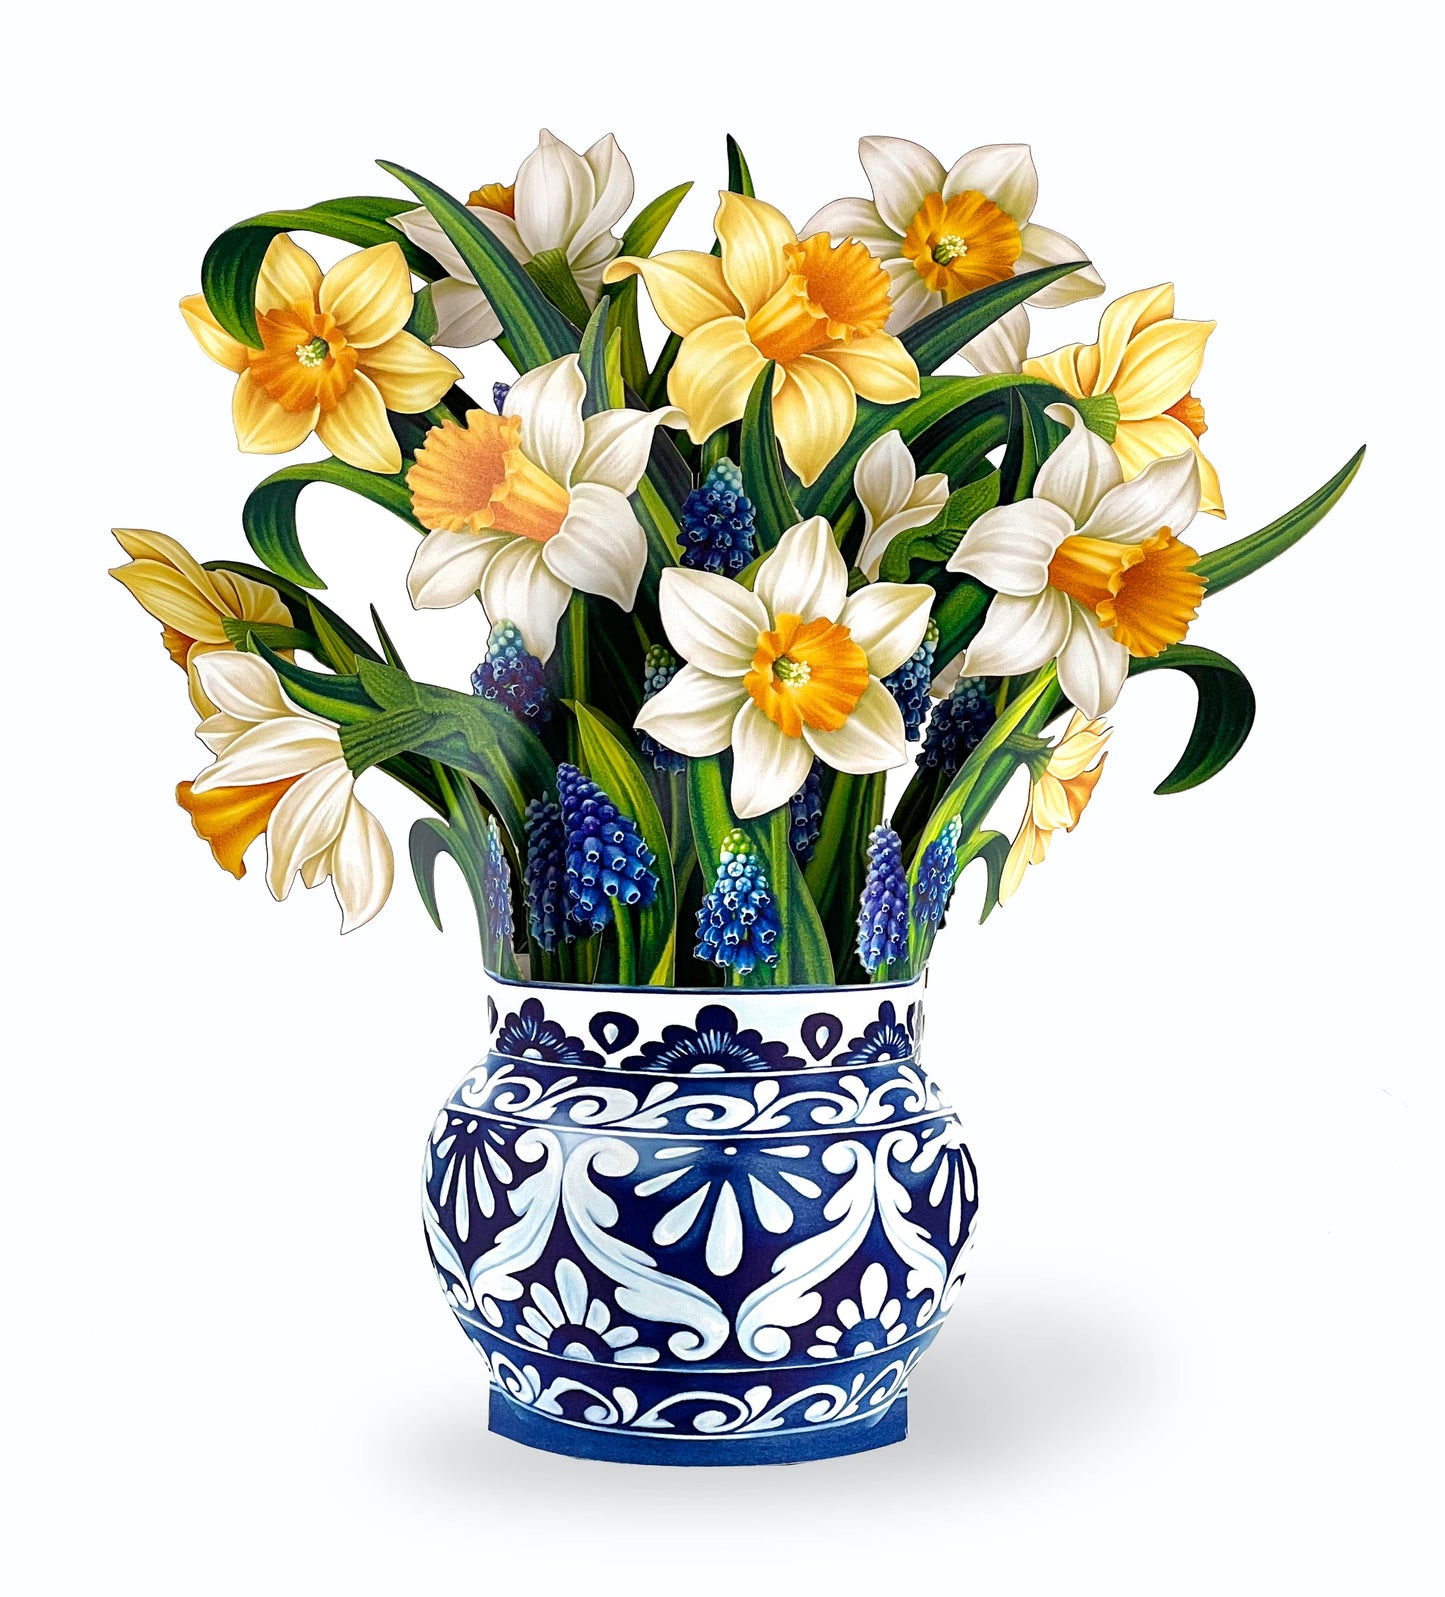 English Daffodils Pop-up Greeting Cards